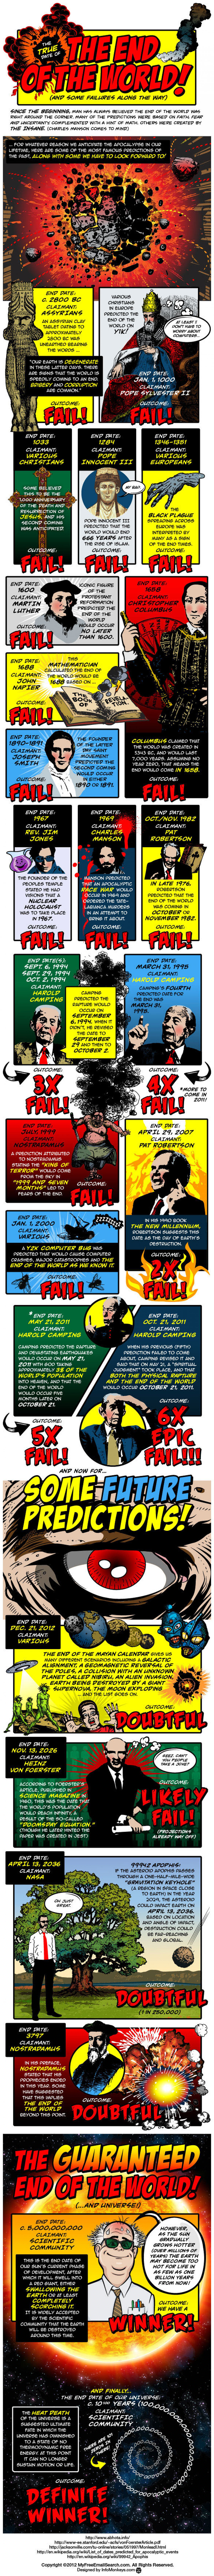 End of the World Predictions and Failures Infographic